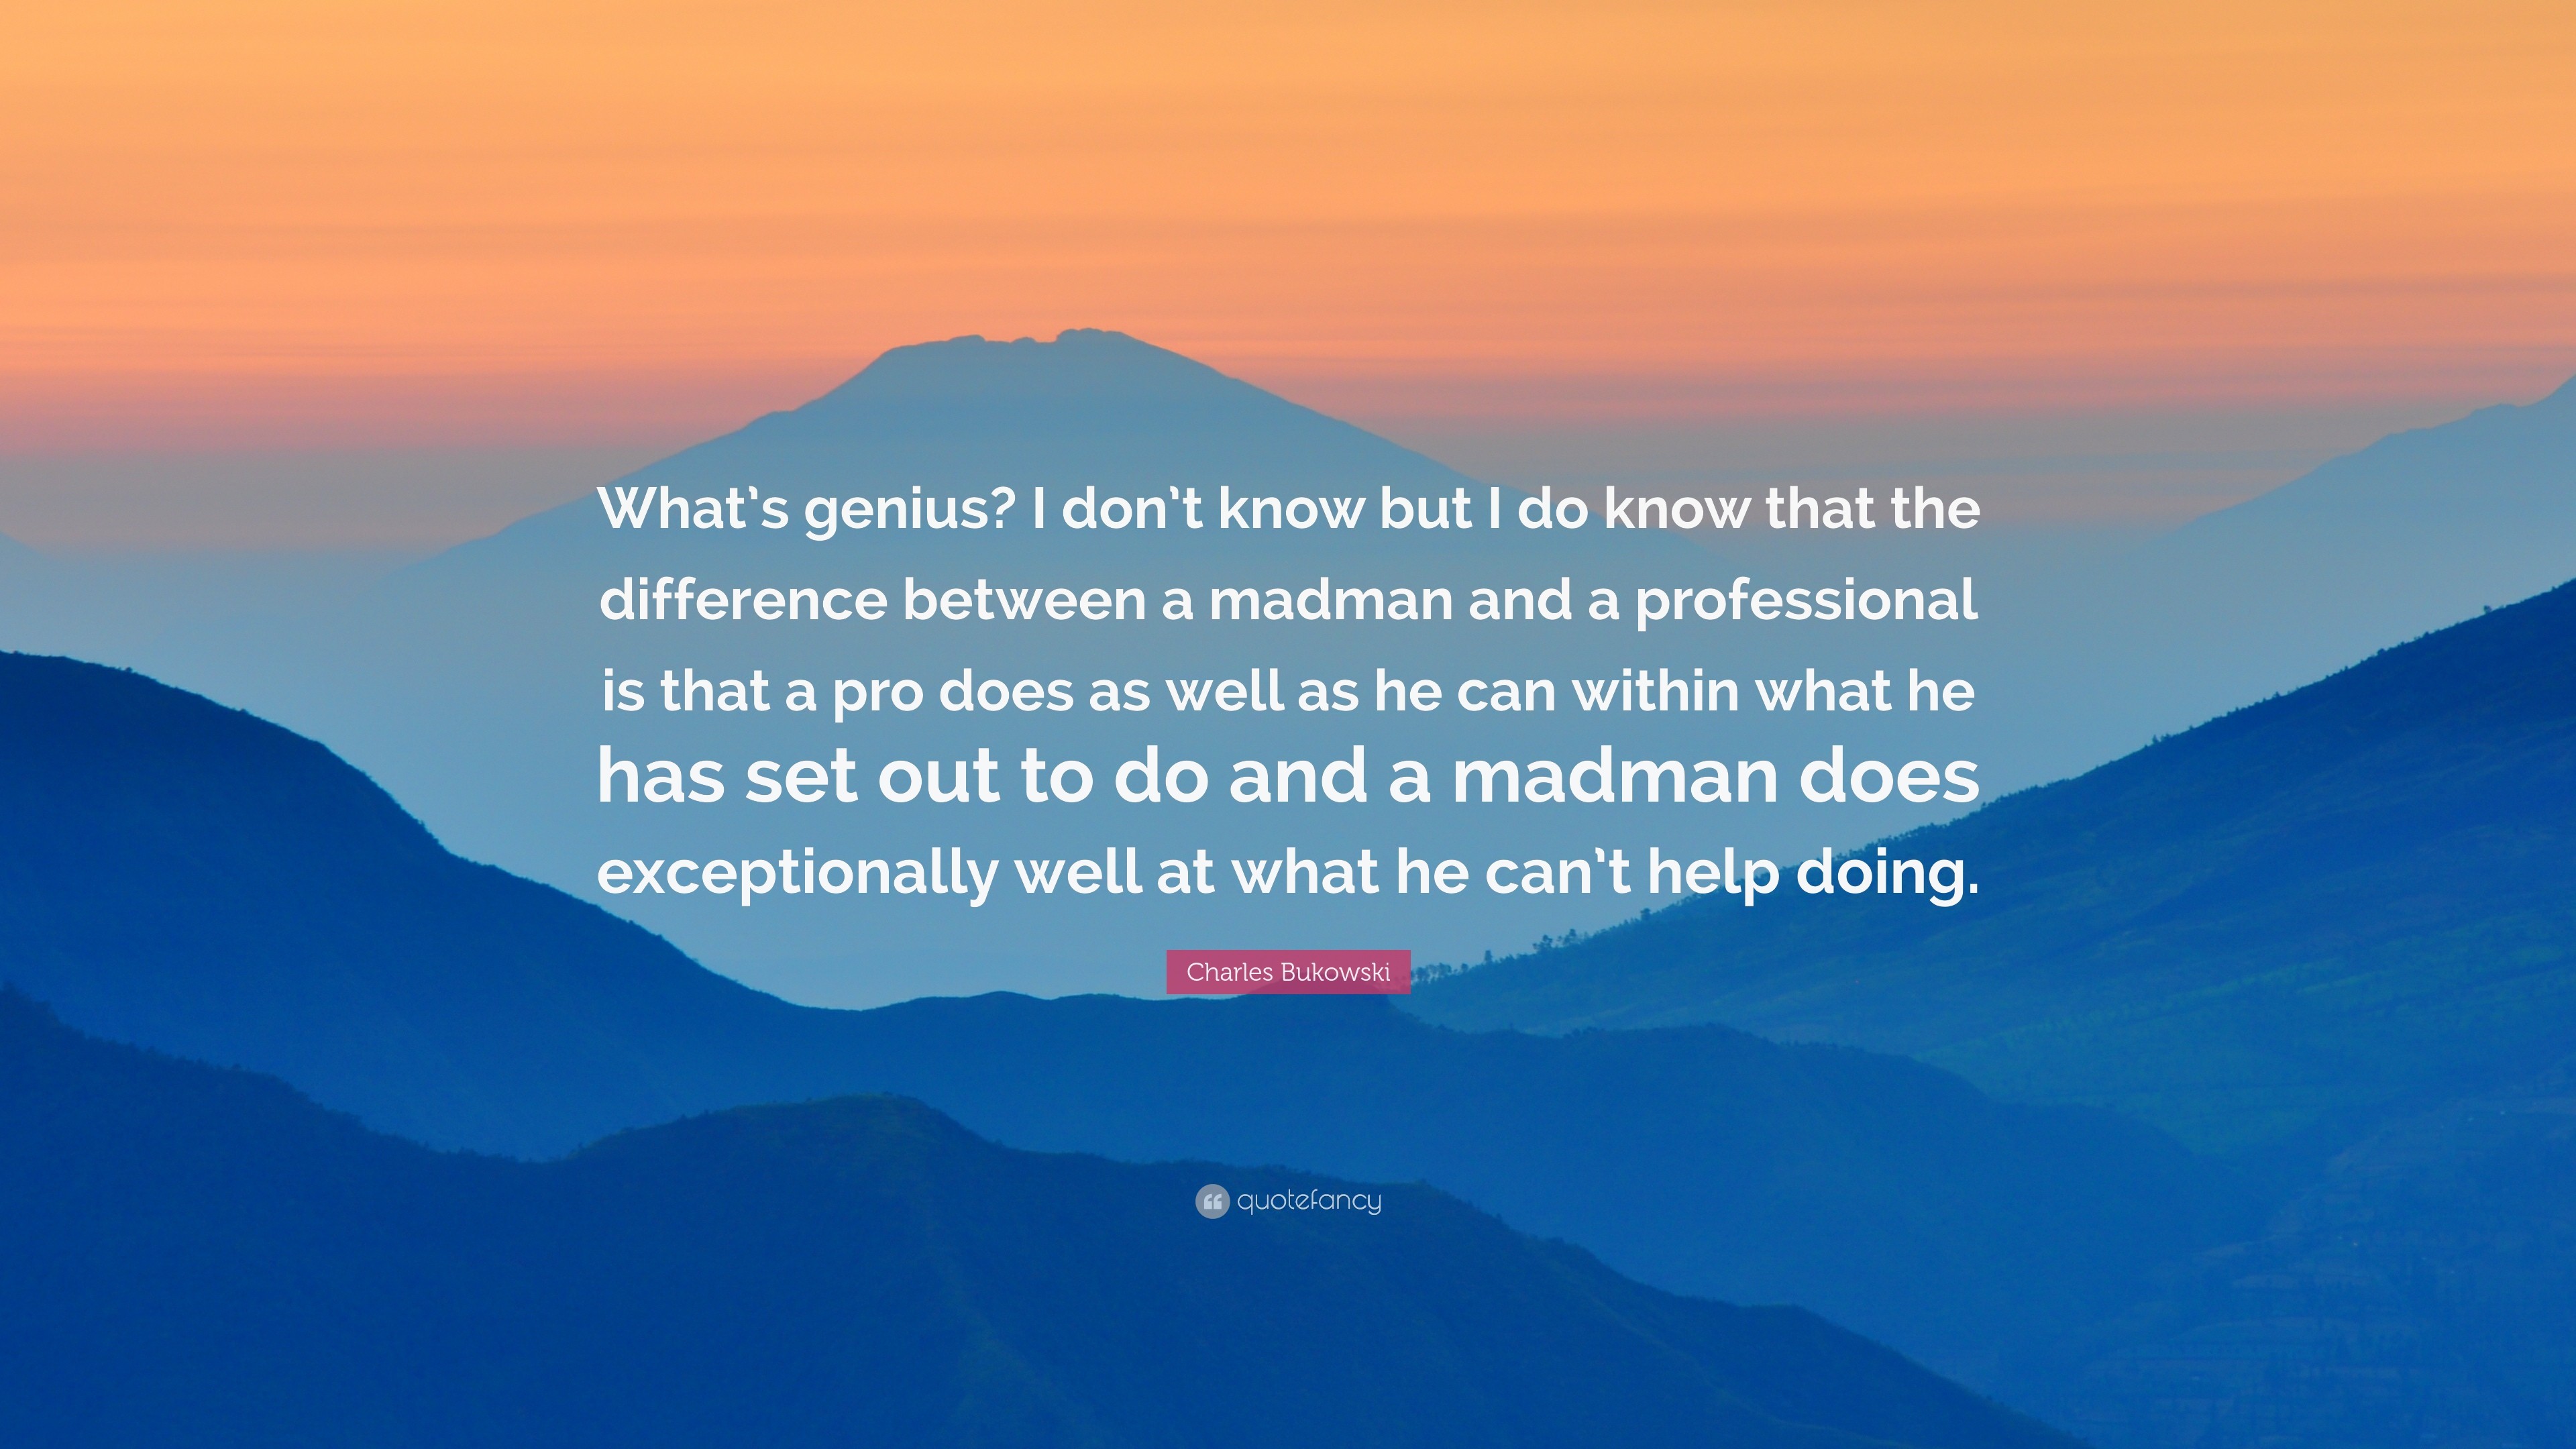 3840x2160 Charles Bukowski Quote: “What's genius? I don't know but I do